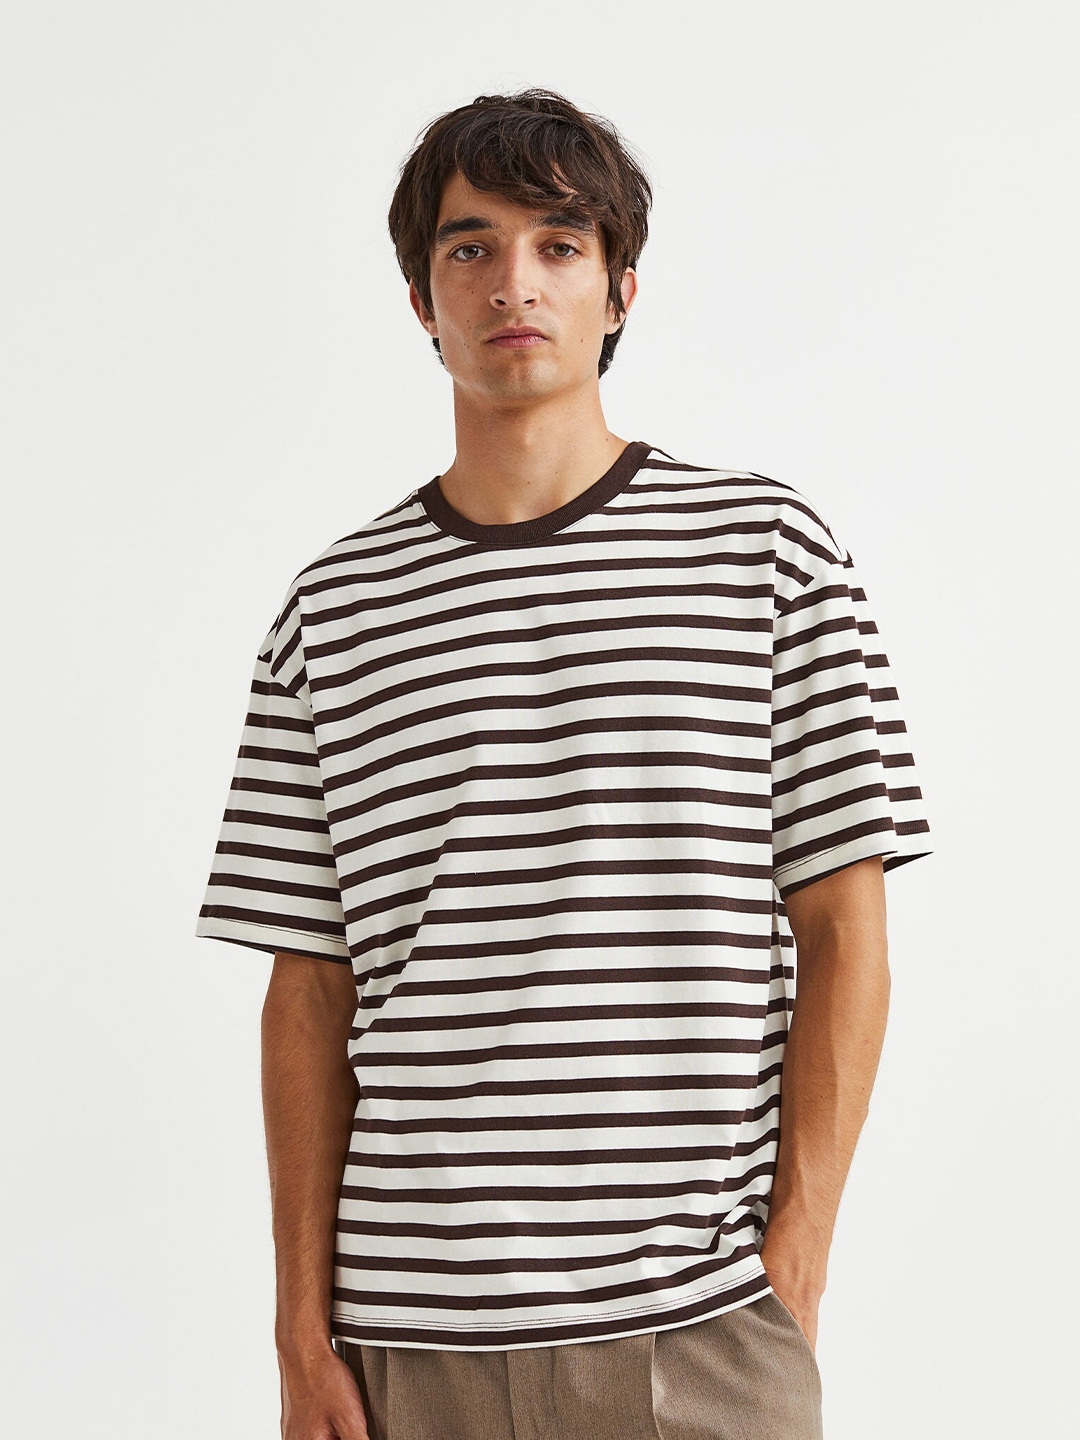 Buy H&M Men Relaxed Fit Cotton T Shirt - Tshirts for Men 20163106 | Myntra